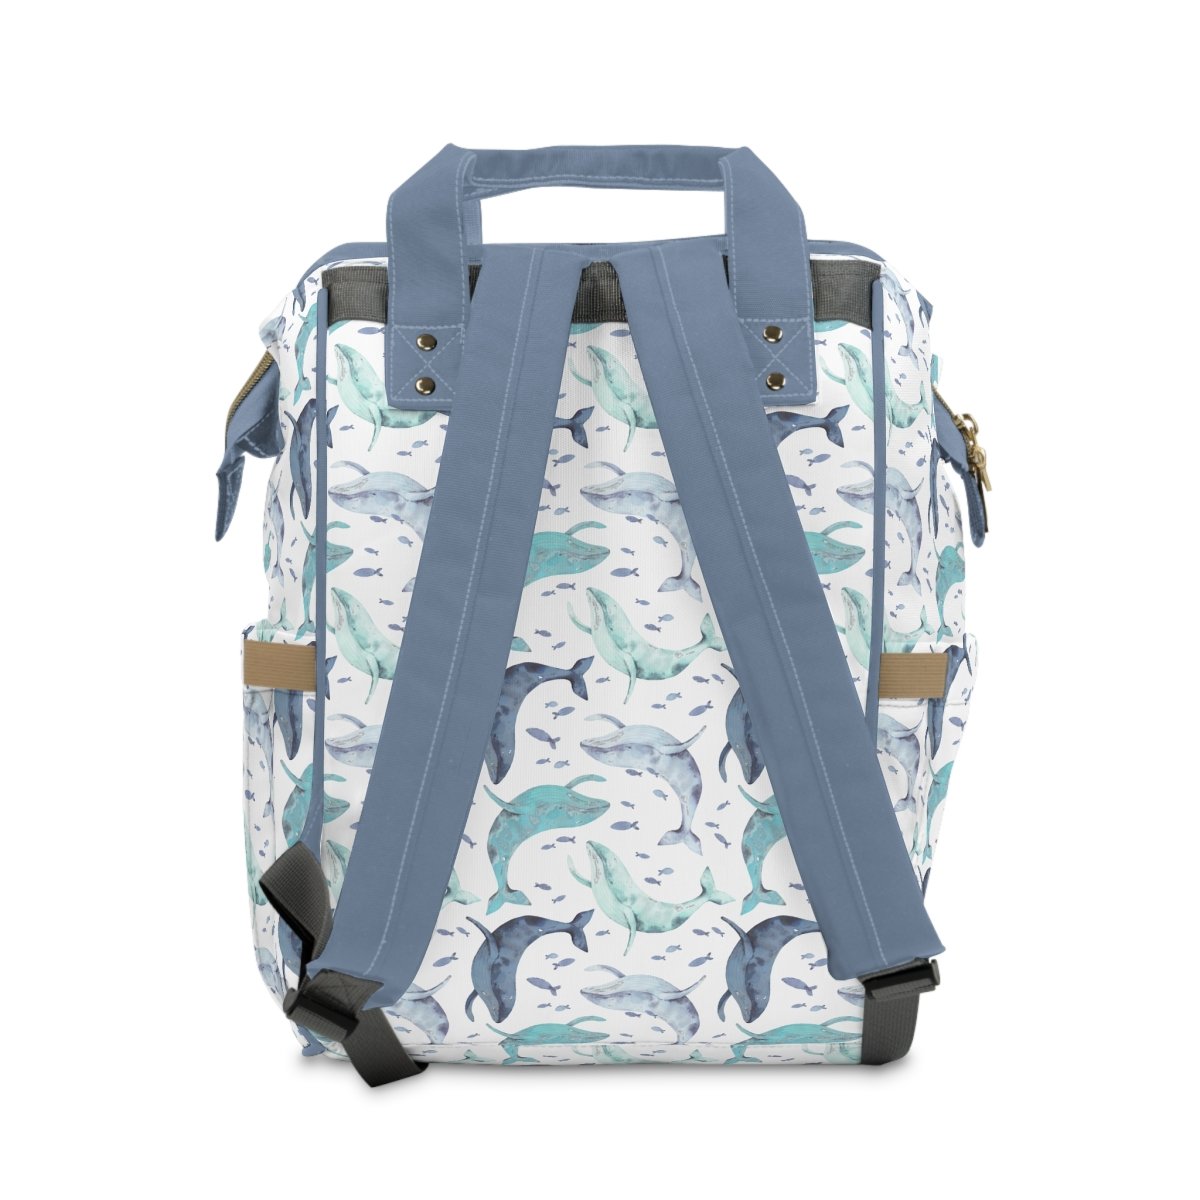 Oh Whale! Personalized Backpack Diaper Bag - gender_boy, gender_neutral, Oh Whale!